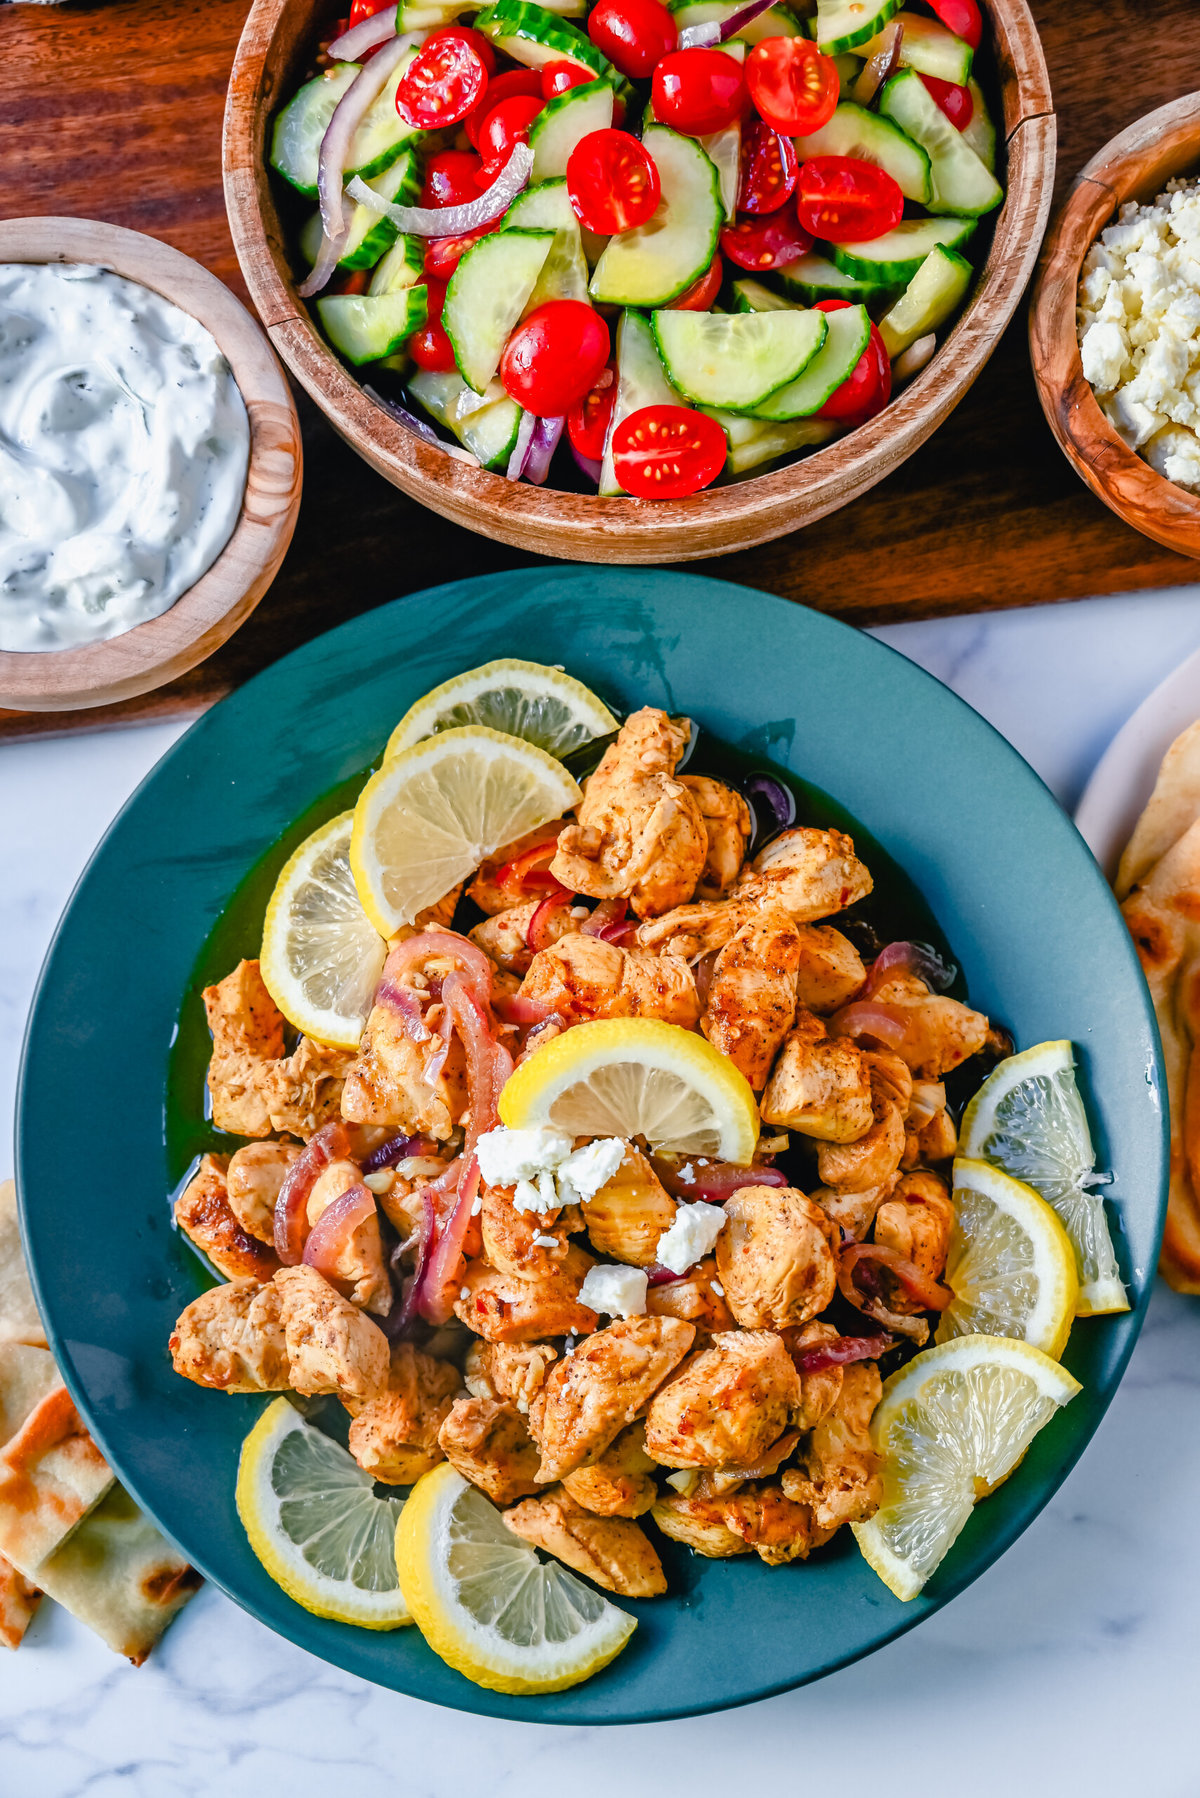 Oven Roasted Chicken Shawarma. Juicy, flavorful Chicken Shawarma made with chicken in a bright, spiced lemon marinade baked in the oven until perfectly cooked. This is such an easy chicken shawarma recipe!